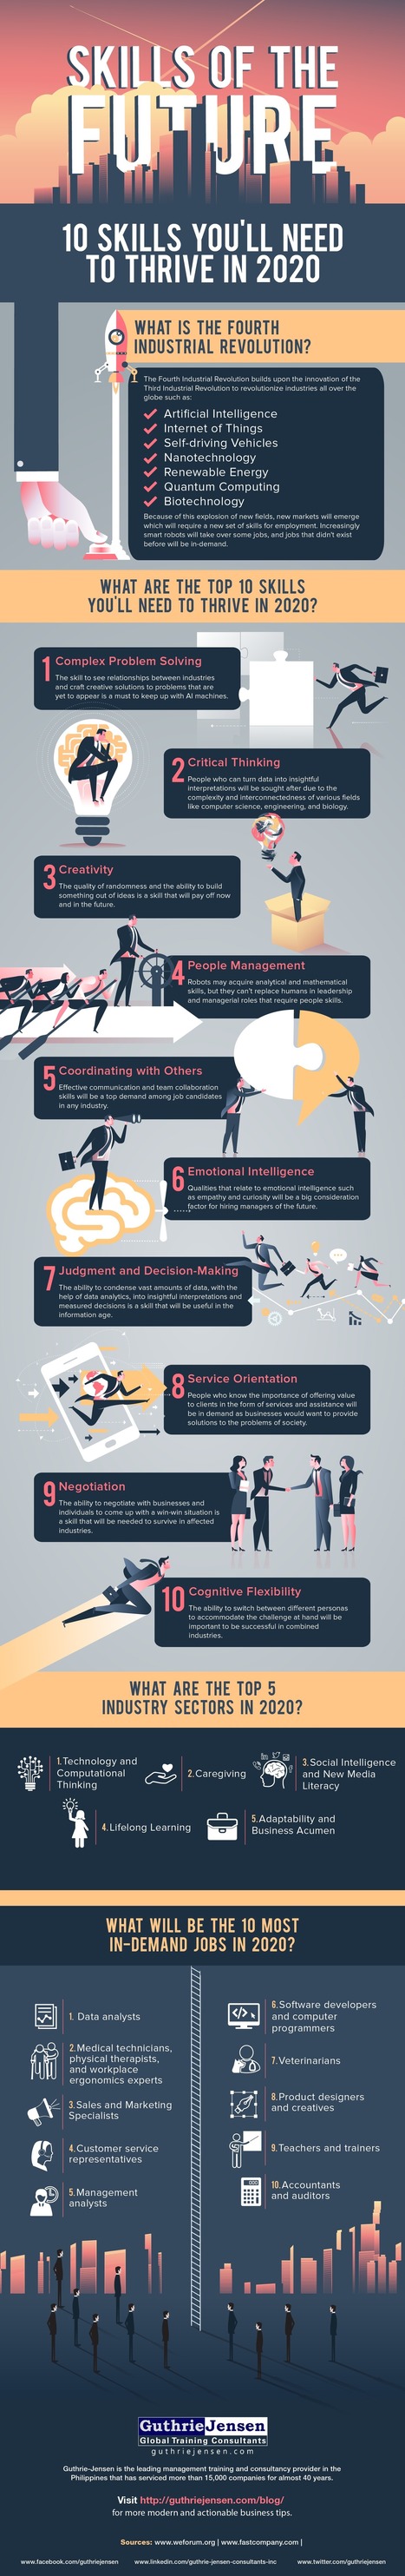 10 Skills That Every Employee Will Need To Thrive in 2020 (Infographic) - Social Talent | #HR #RRHH Making love and making personal #branding #leadership | Scoop.it